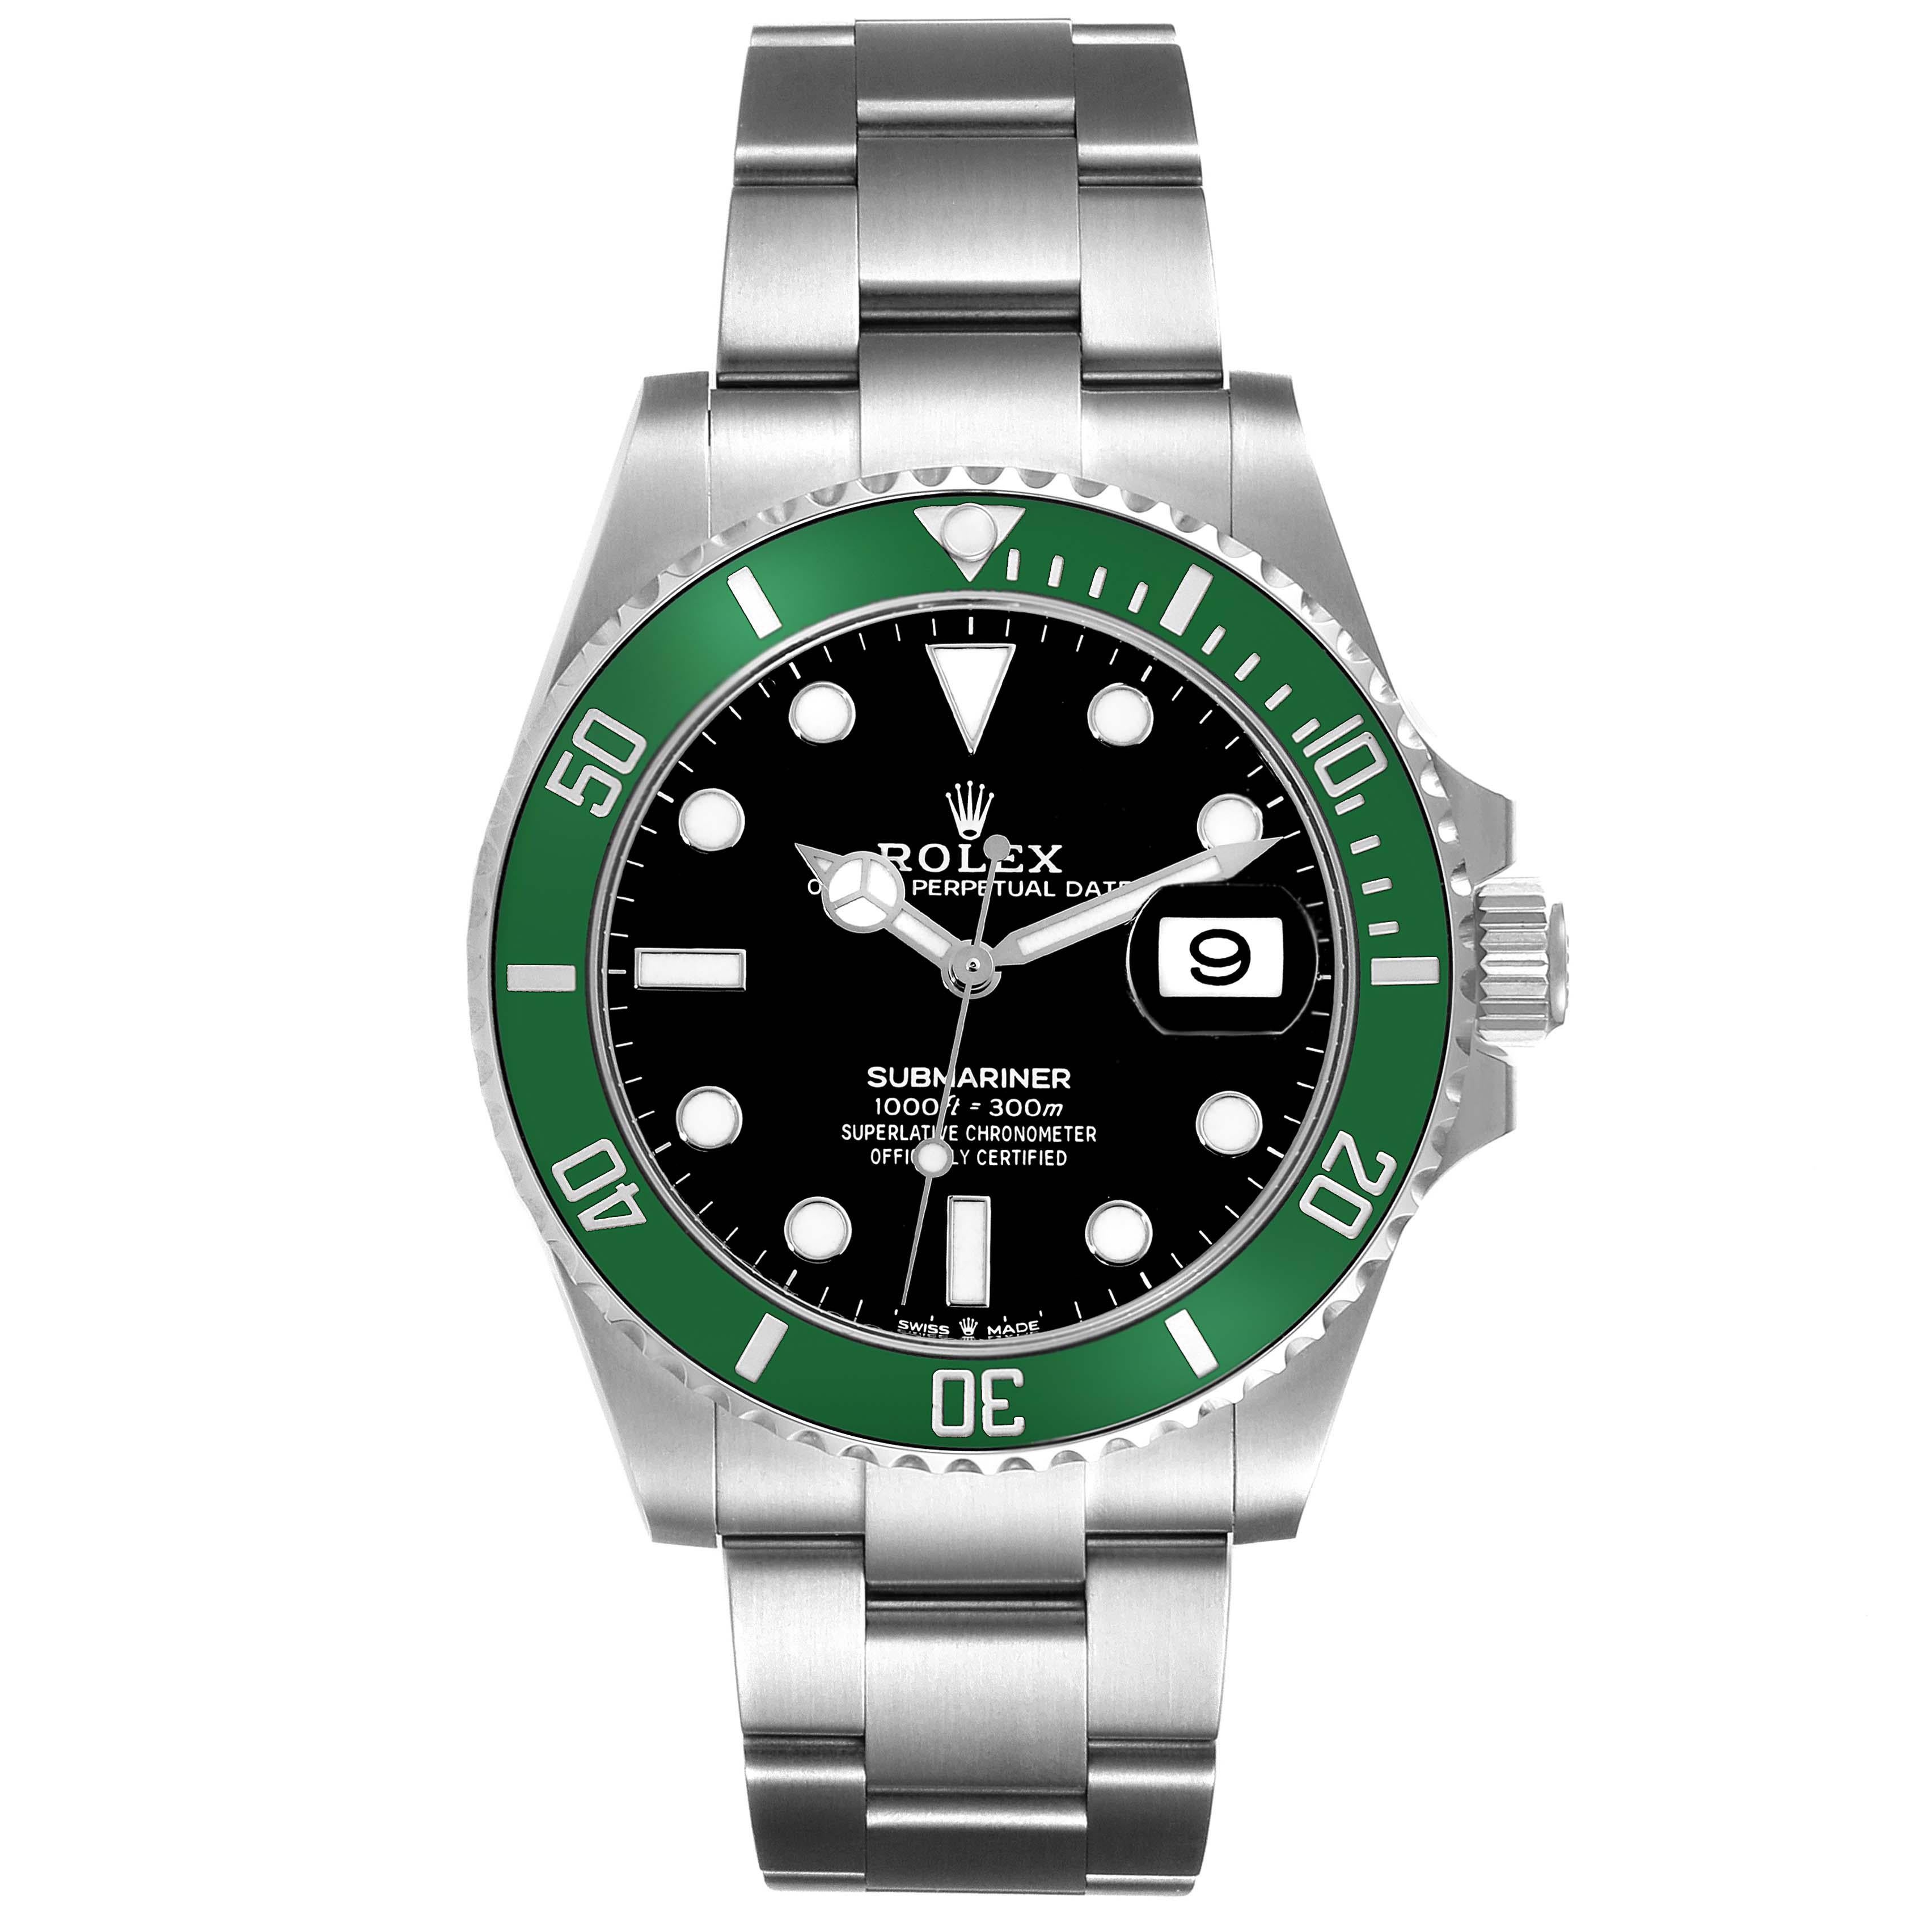 Rolex Submariner Starbucks Green Ceramic Bezel Mens Watch 126610LV Box Card. Officially certified chronometer automatic self-winding movement. Paramagnetic blue Parachrom hairspring. High-performance Paraflex shock absorbers. Stainless steel oyster